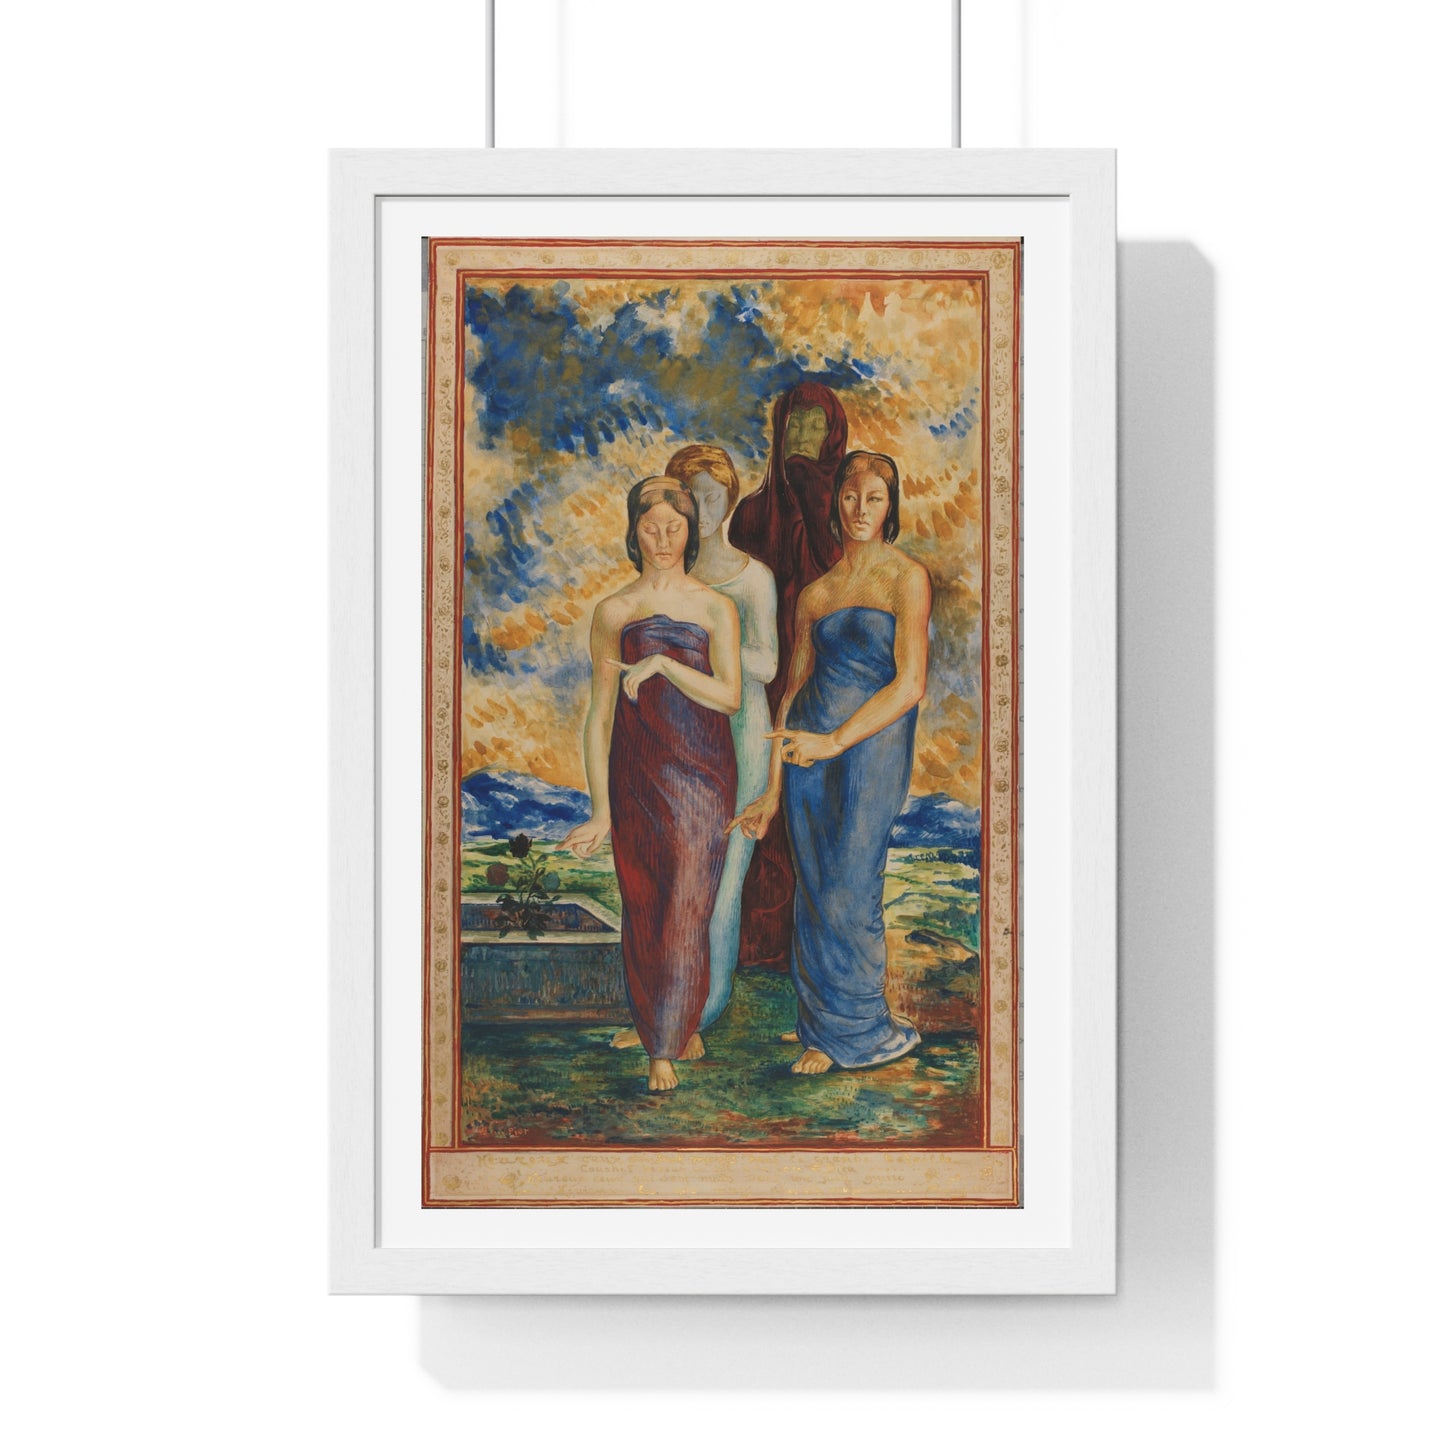 Allegorical Figures (1868-1915) by René Piot, from the Original, Wooden Framed Print